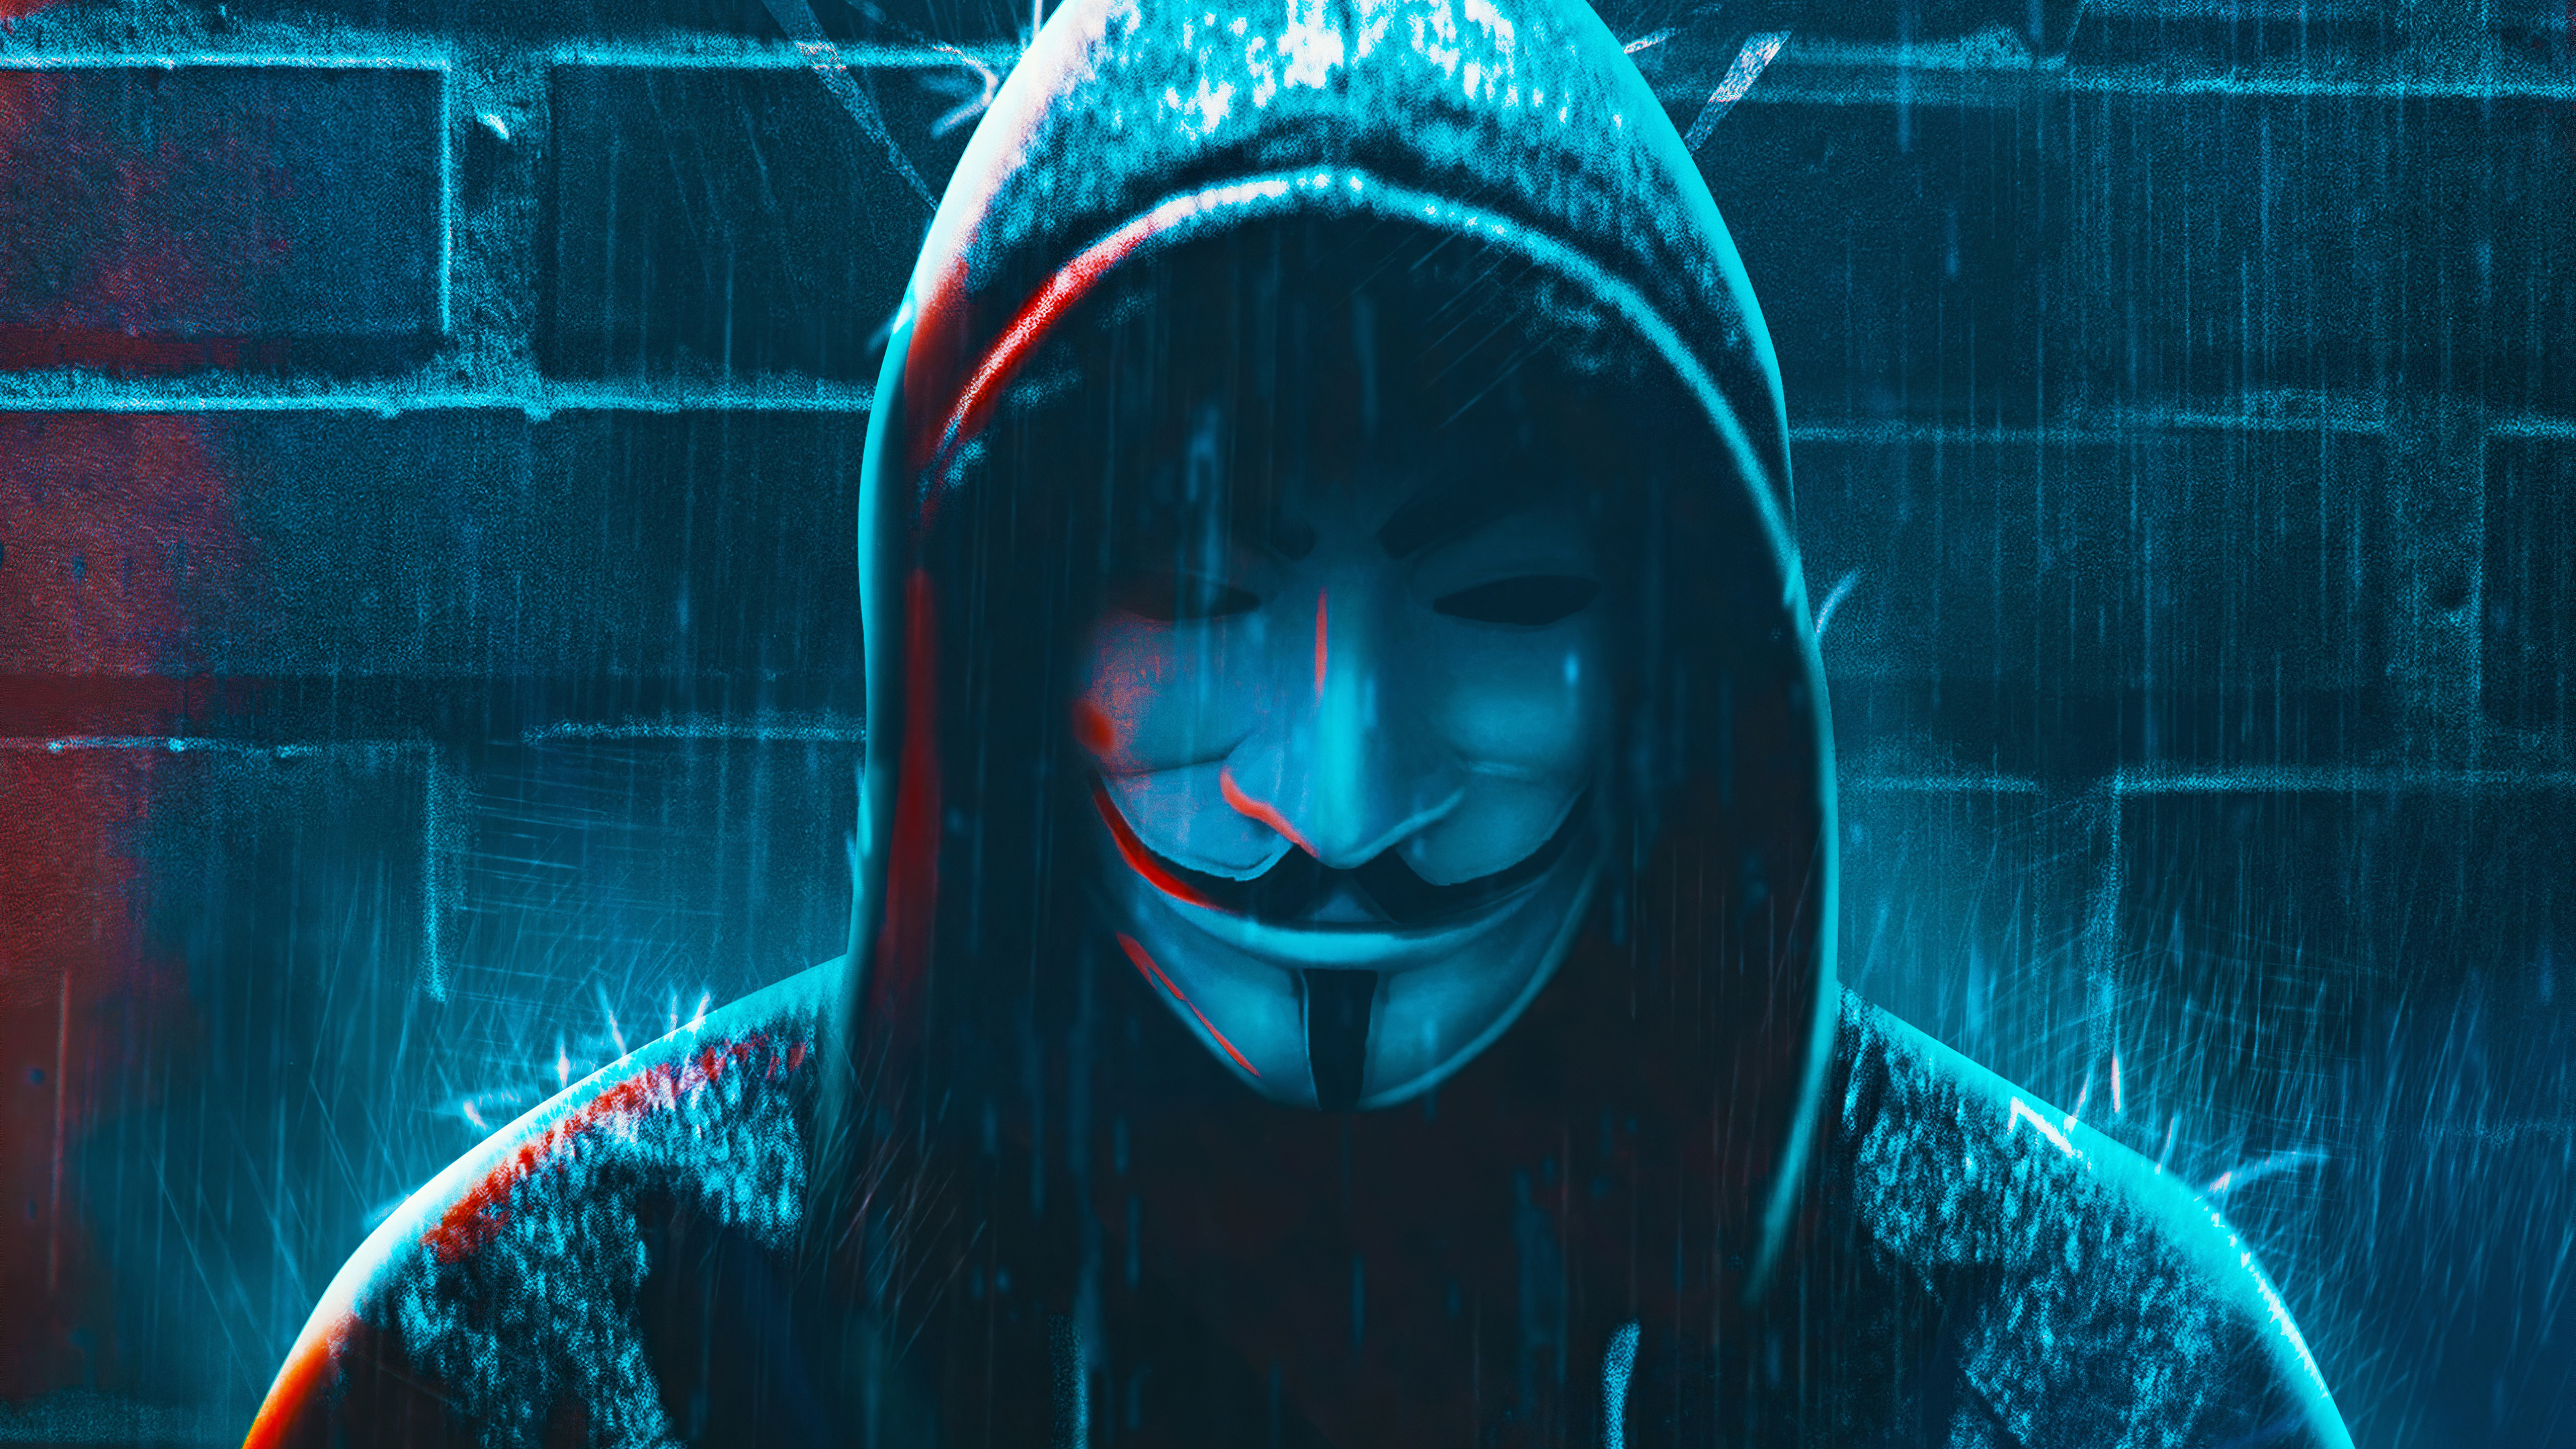 1280x800 Anonymous 4k Hacker Mask 1280x800 Resolution Wallpaper Hd Artist 4k Wallpapers Images Photos And Background